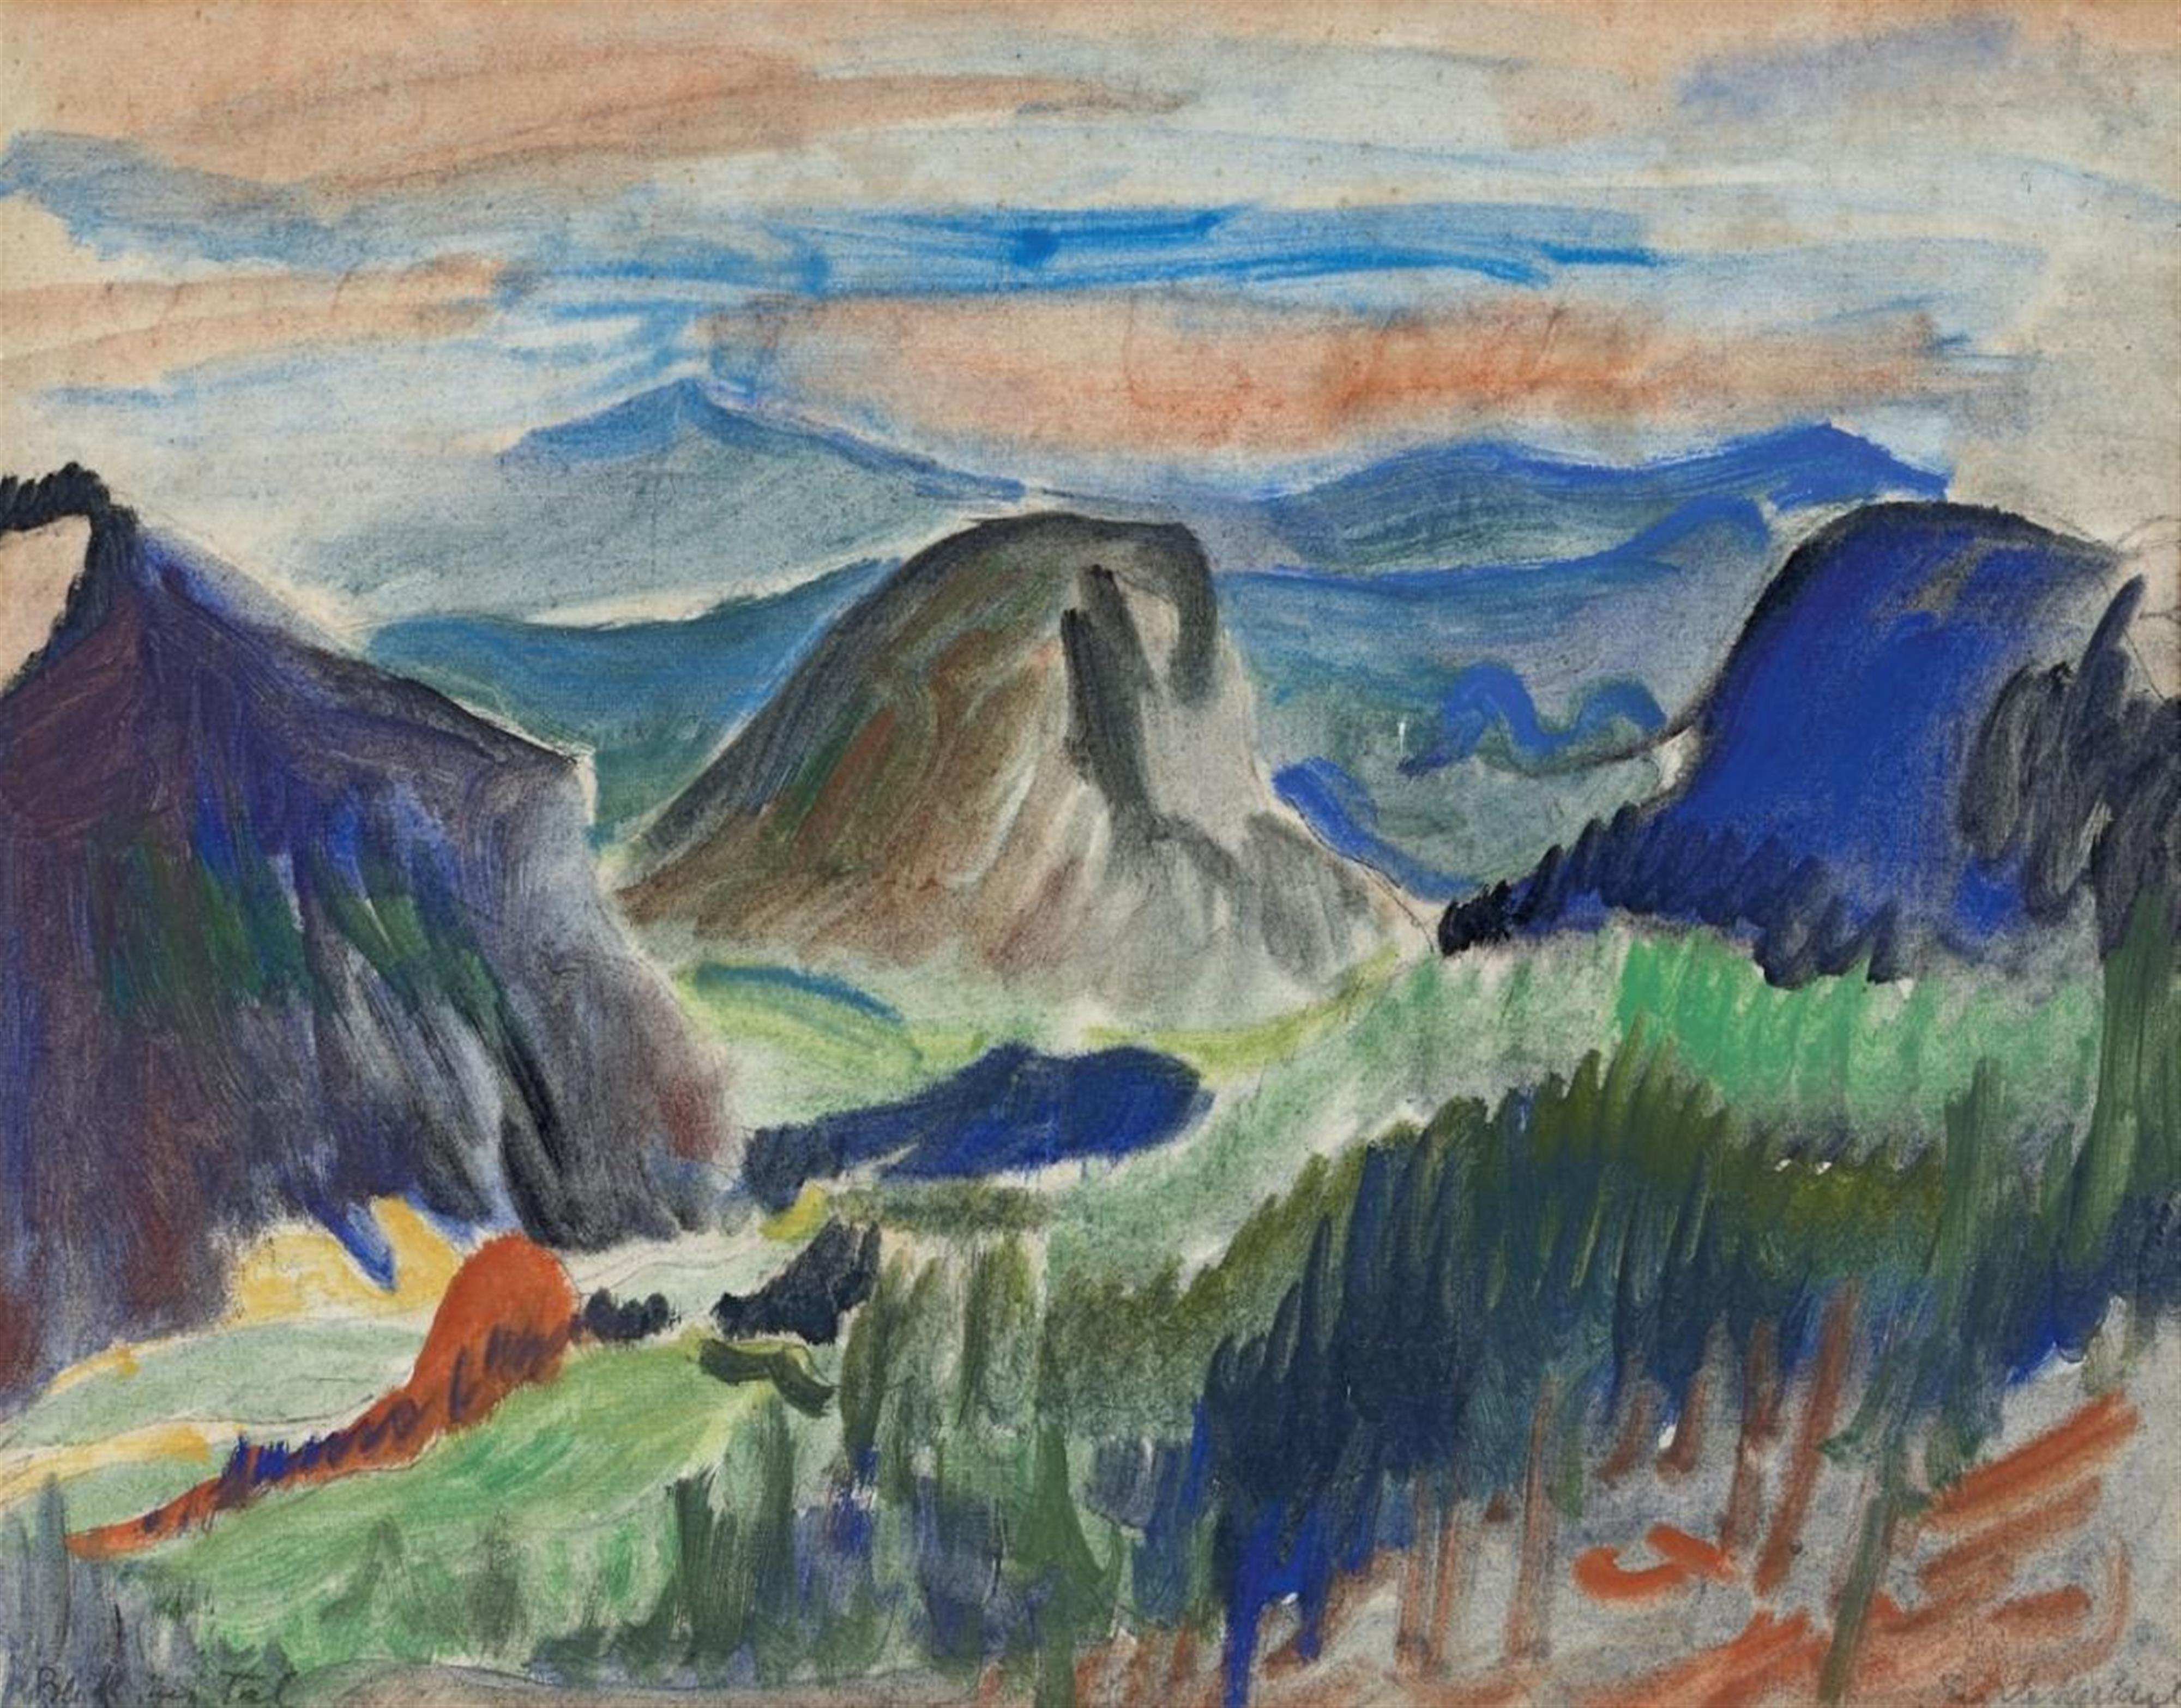 Erich Heckel - Blick ins Tal (View into the Valley) - image-1